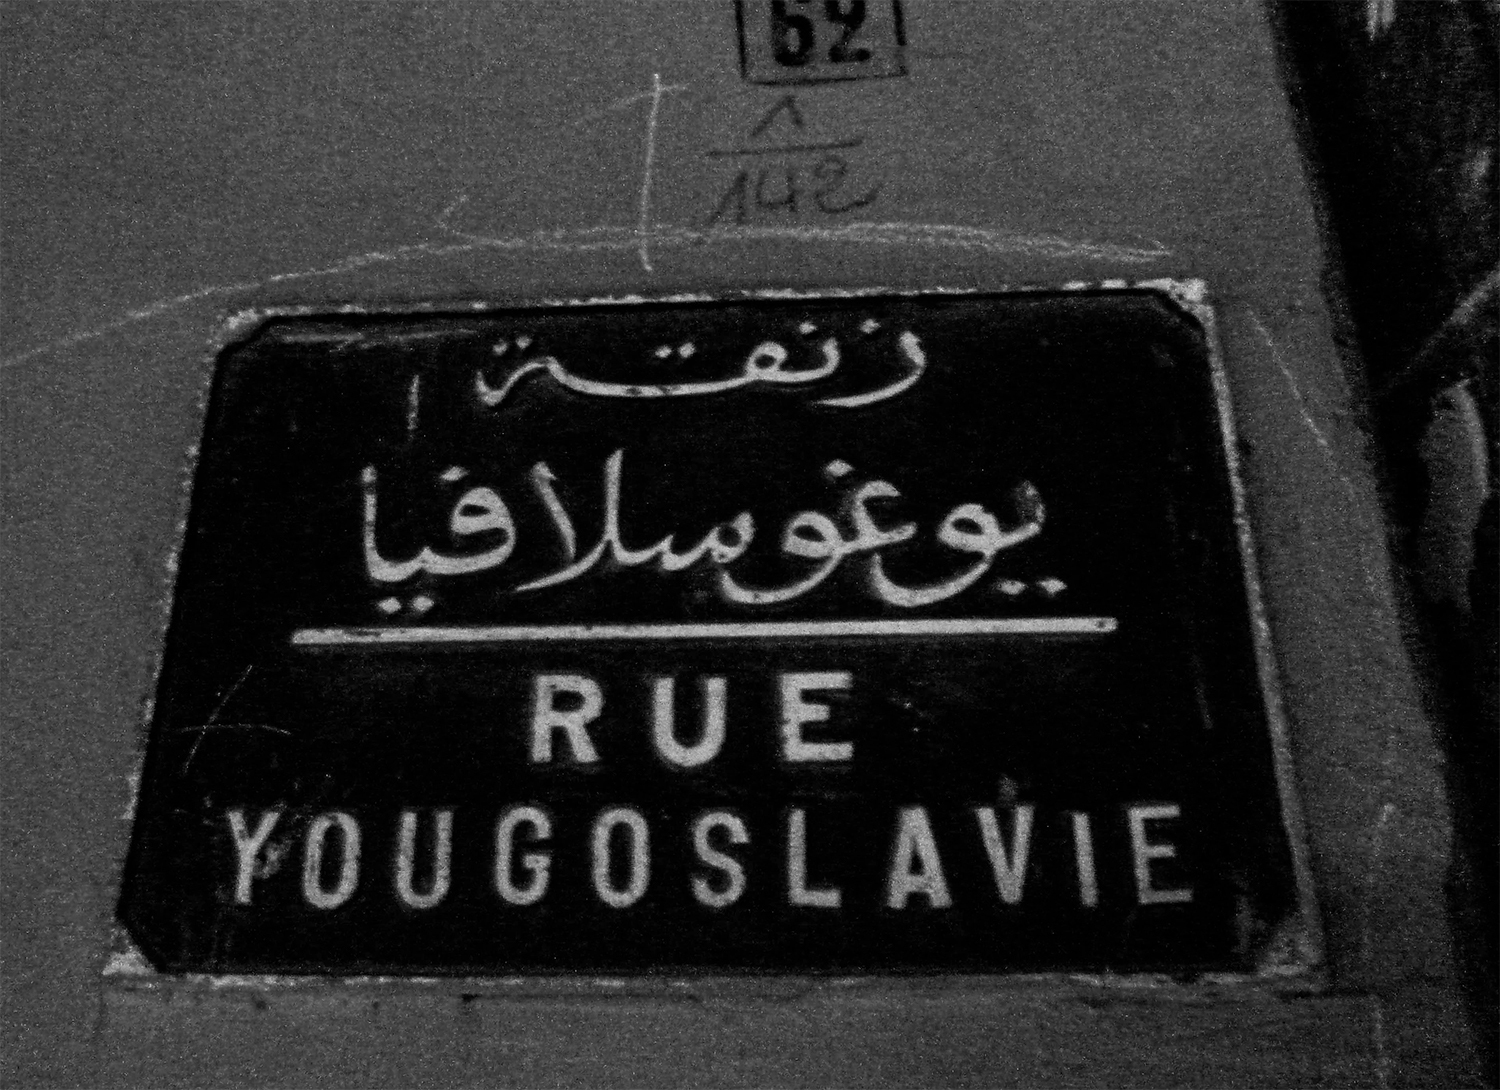 <p>An old street sign in Marrakech's Guéliz quarter preserves the name of Yugoslavia, a country that is no longer with us. The street has carried the name since Moroccan independence in 1956. Previously, it had also been associated with the Balkan state – named Rue Alexandre 1er to commemorate the Yugoslav king gunned down in the streets of Marseille in 1934. <br /></p>
<p>I'm still undecided if that is some sort of tribute to Yugoslavia's passing scratched into the concrete around the sign.</p>